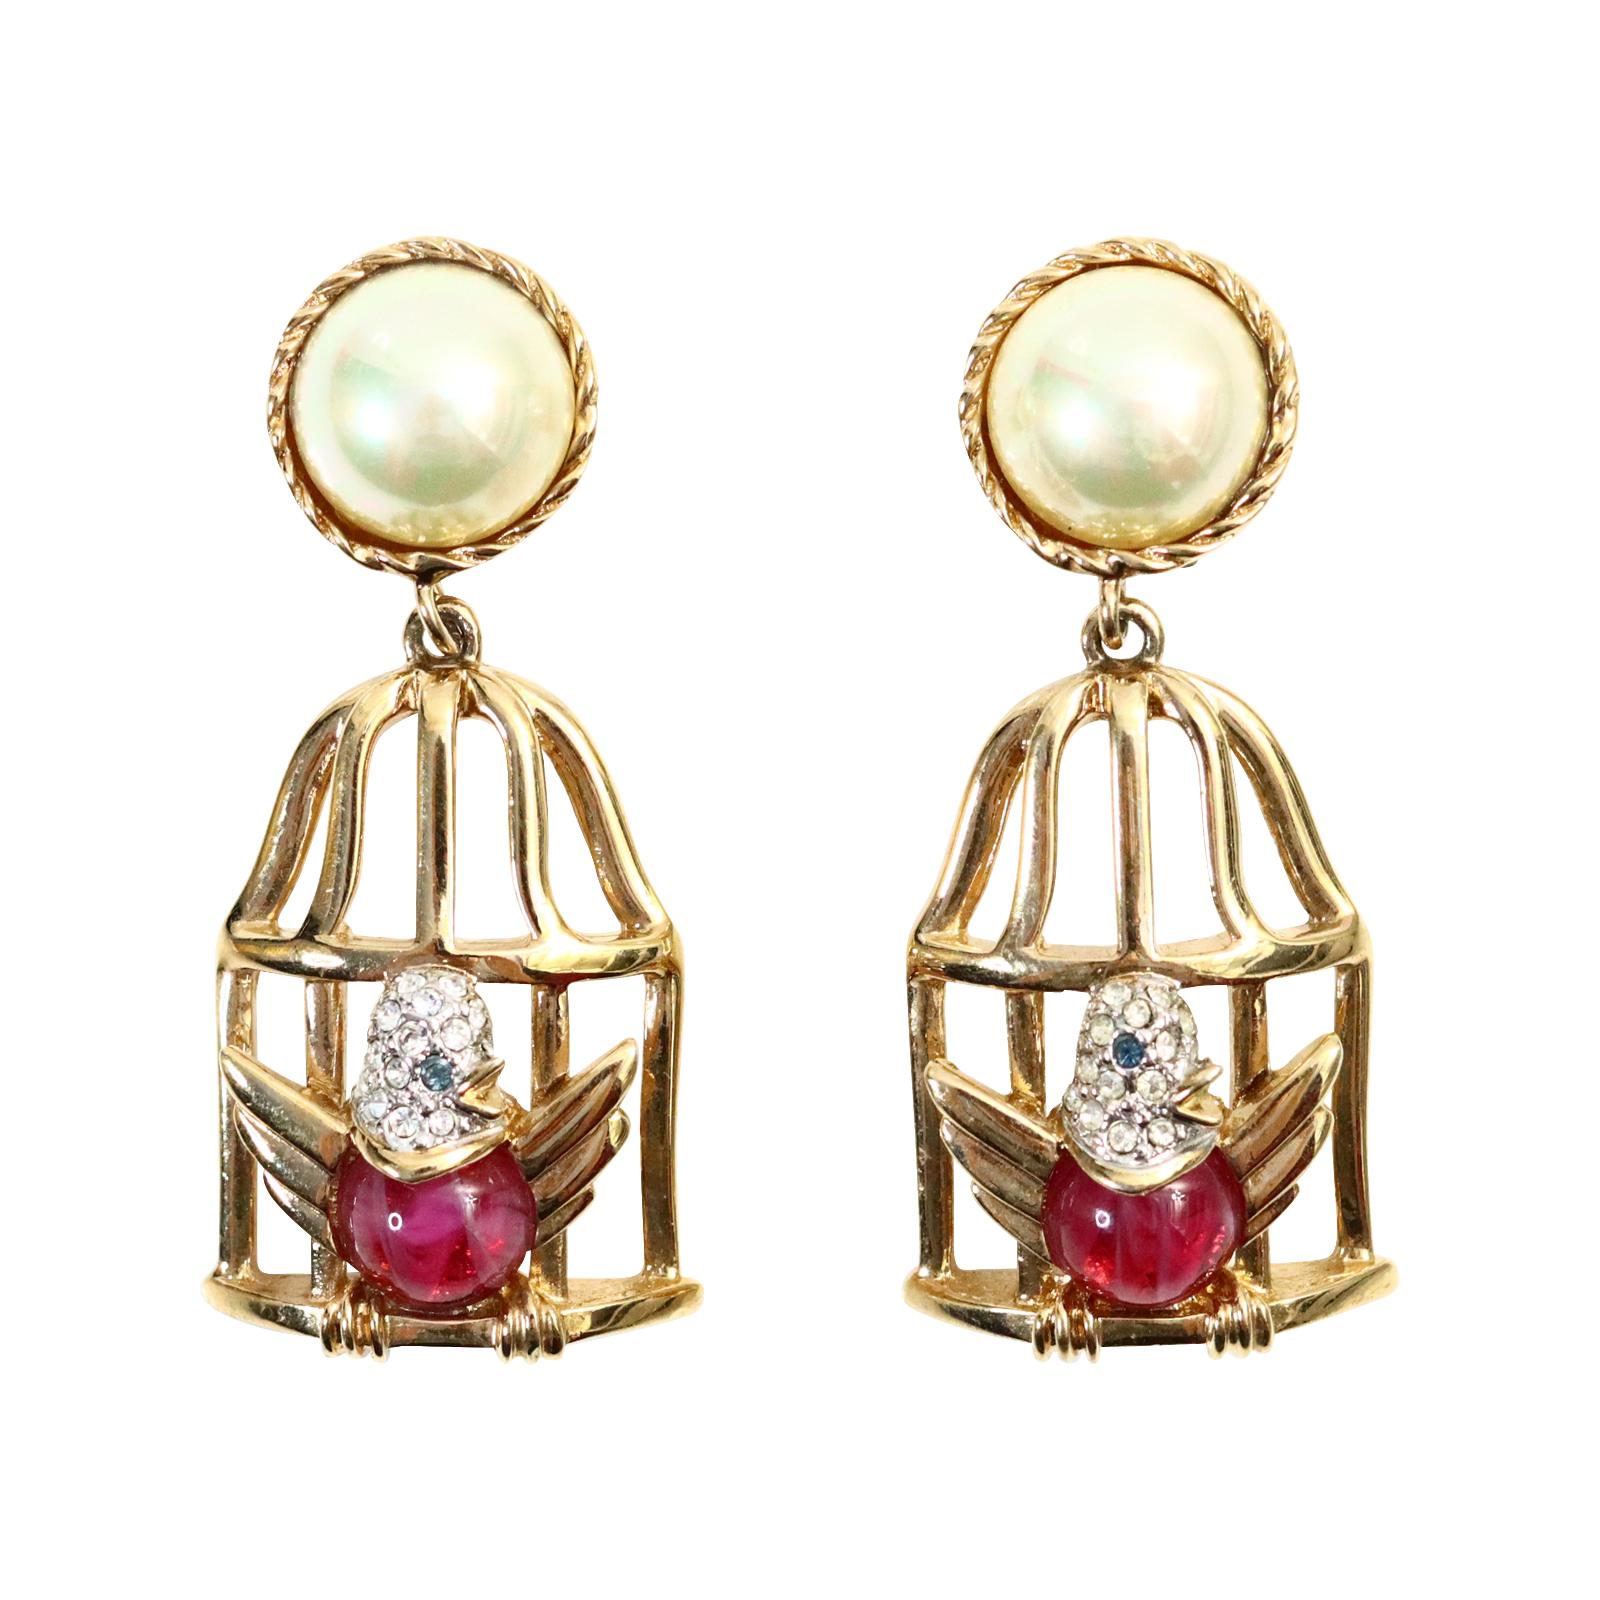 Vintage Carolee Gold and Faux Pearl Dangling Birdcage Earrings Circa 1980s. The earrings have a gold bird with a pink cabochon and diamante face in the gold cage. So stylish. 
Yes, these are sweet but they are also very well made! Clip On.